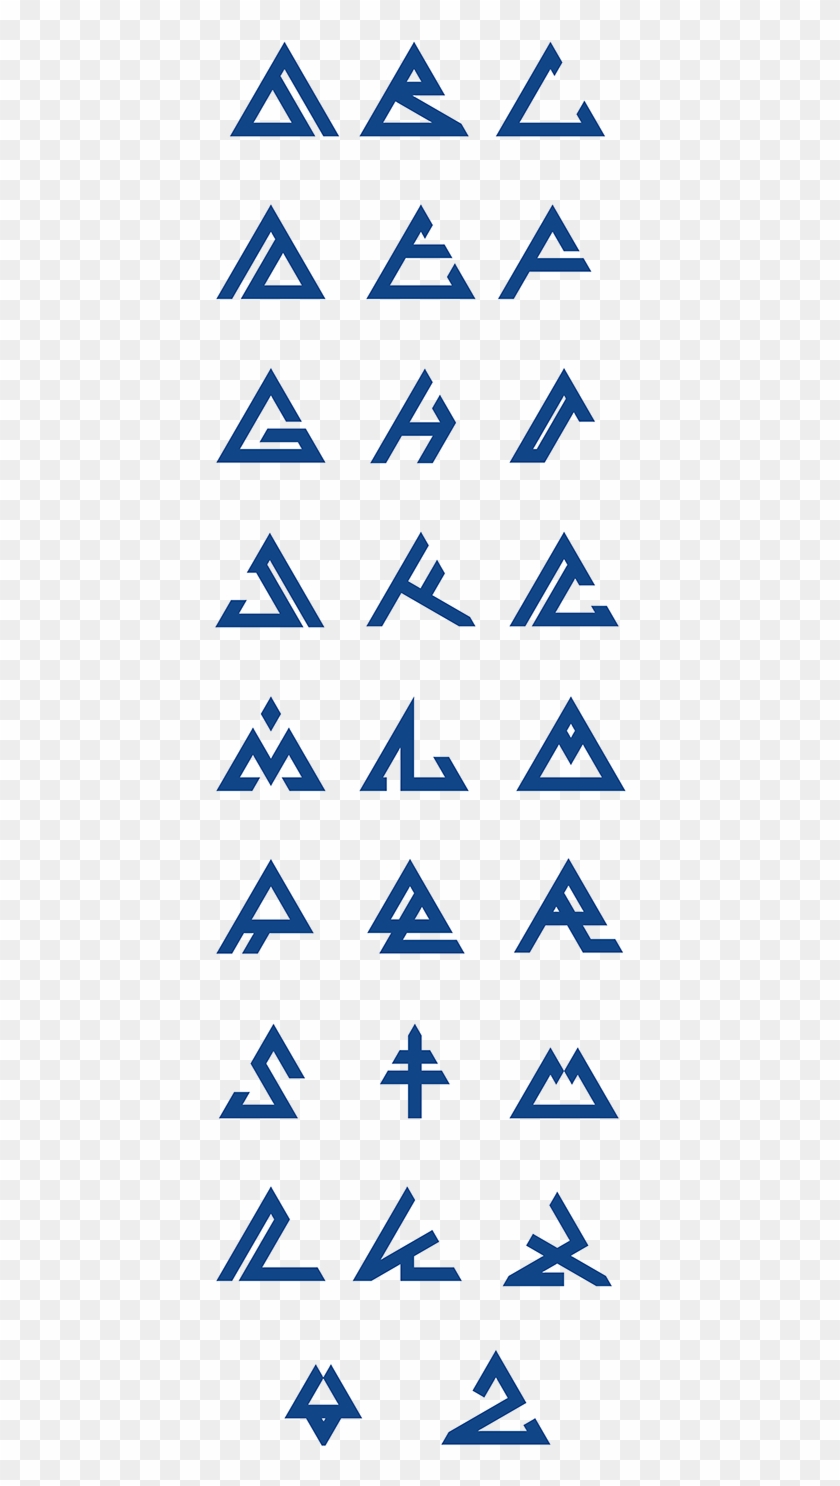 Volcano Is A Geometrical Typeface Based On Equilateral - Triangle Logo Clipart #1051323